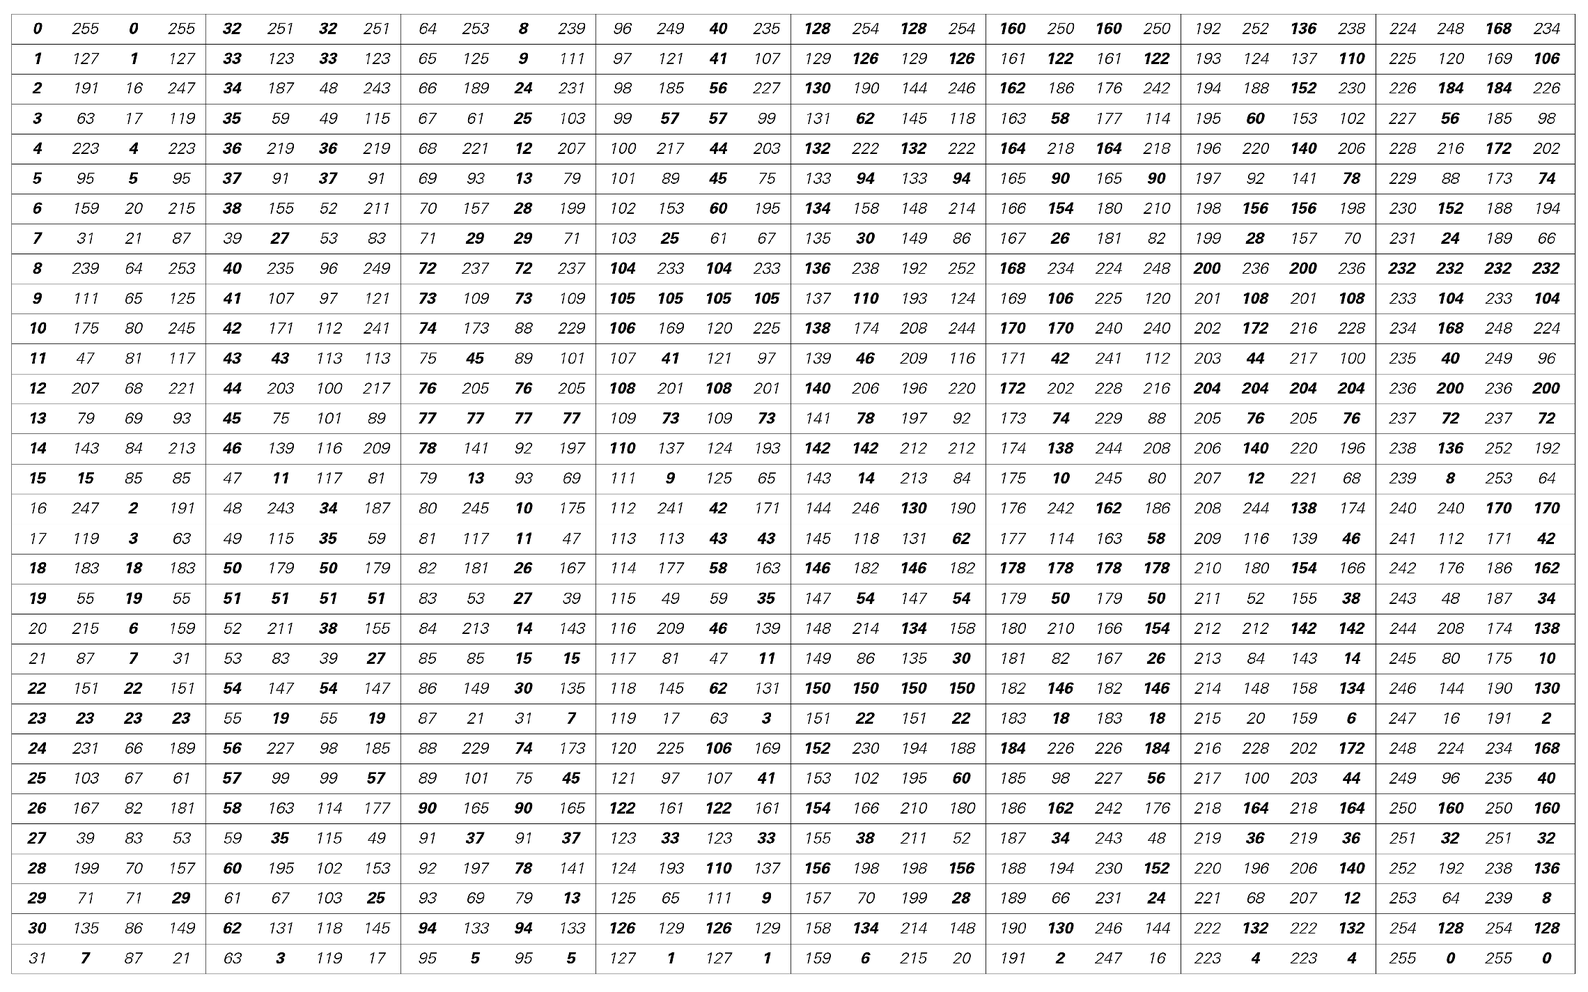 Wolfram Language source code for image on page 883